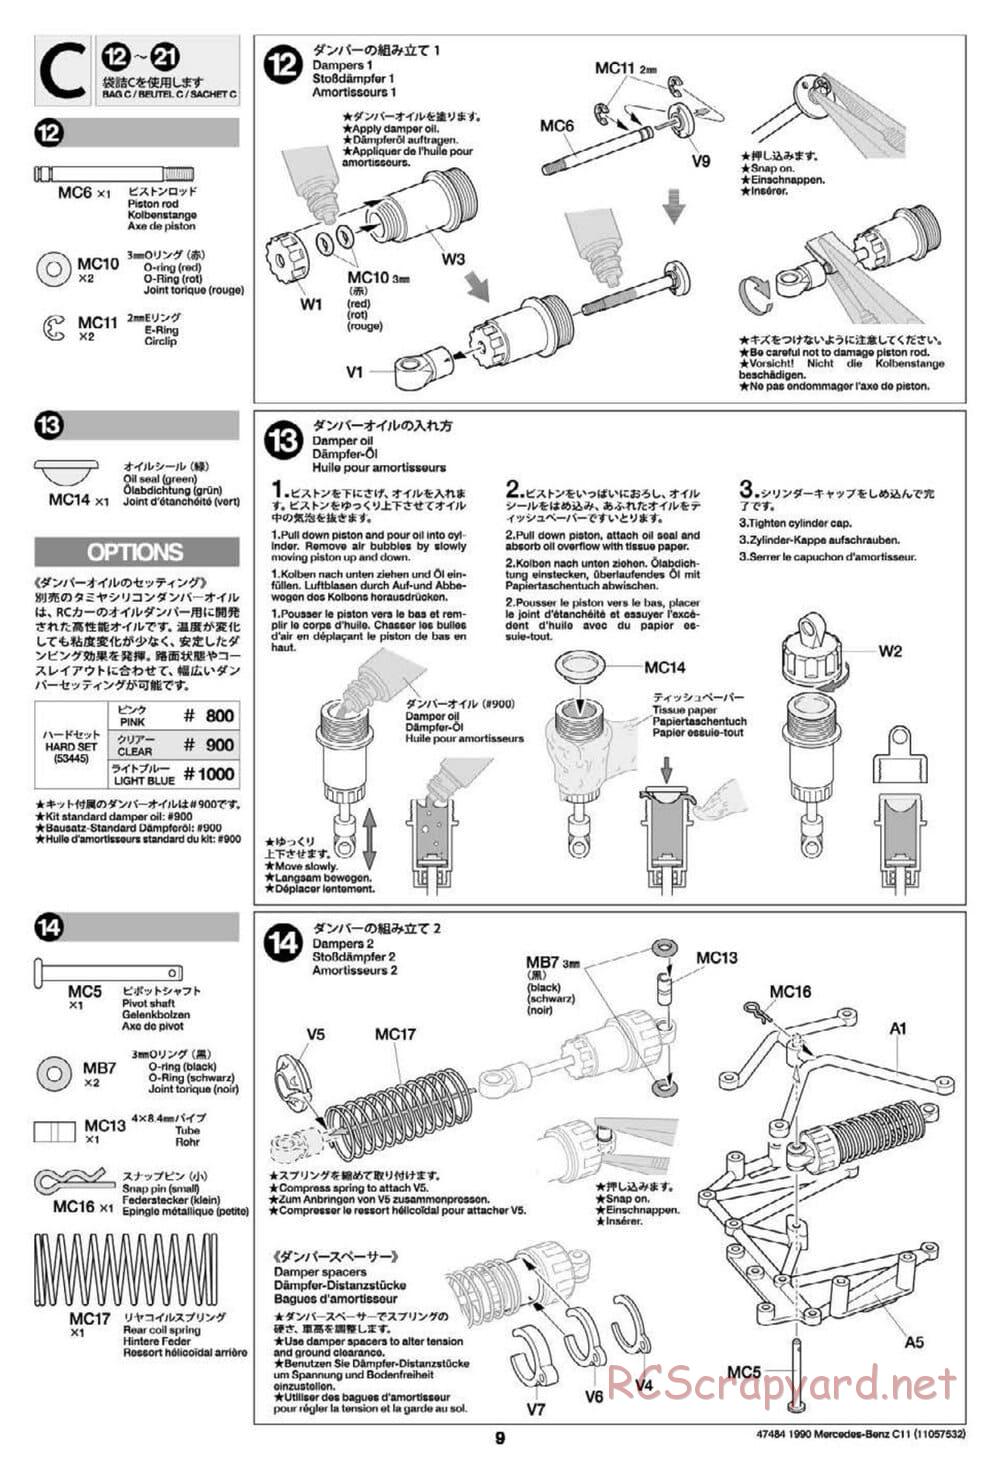 Tamiya - 1990 Mercedes-Benz C11 - Group-C Chassis - Manual - Page 9